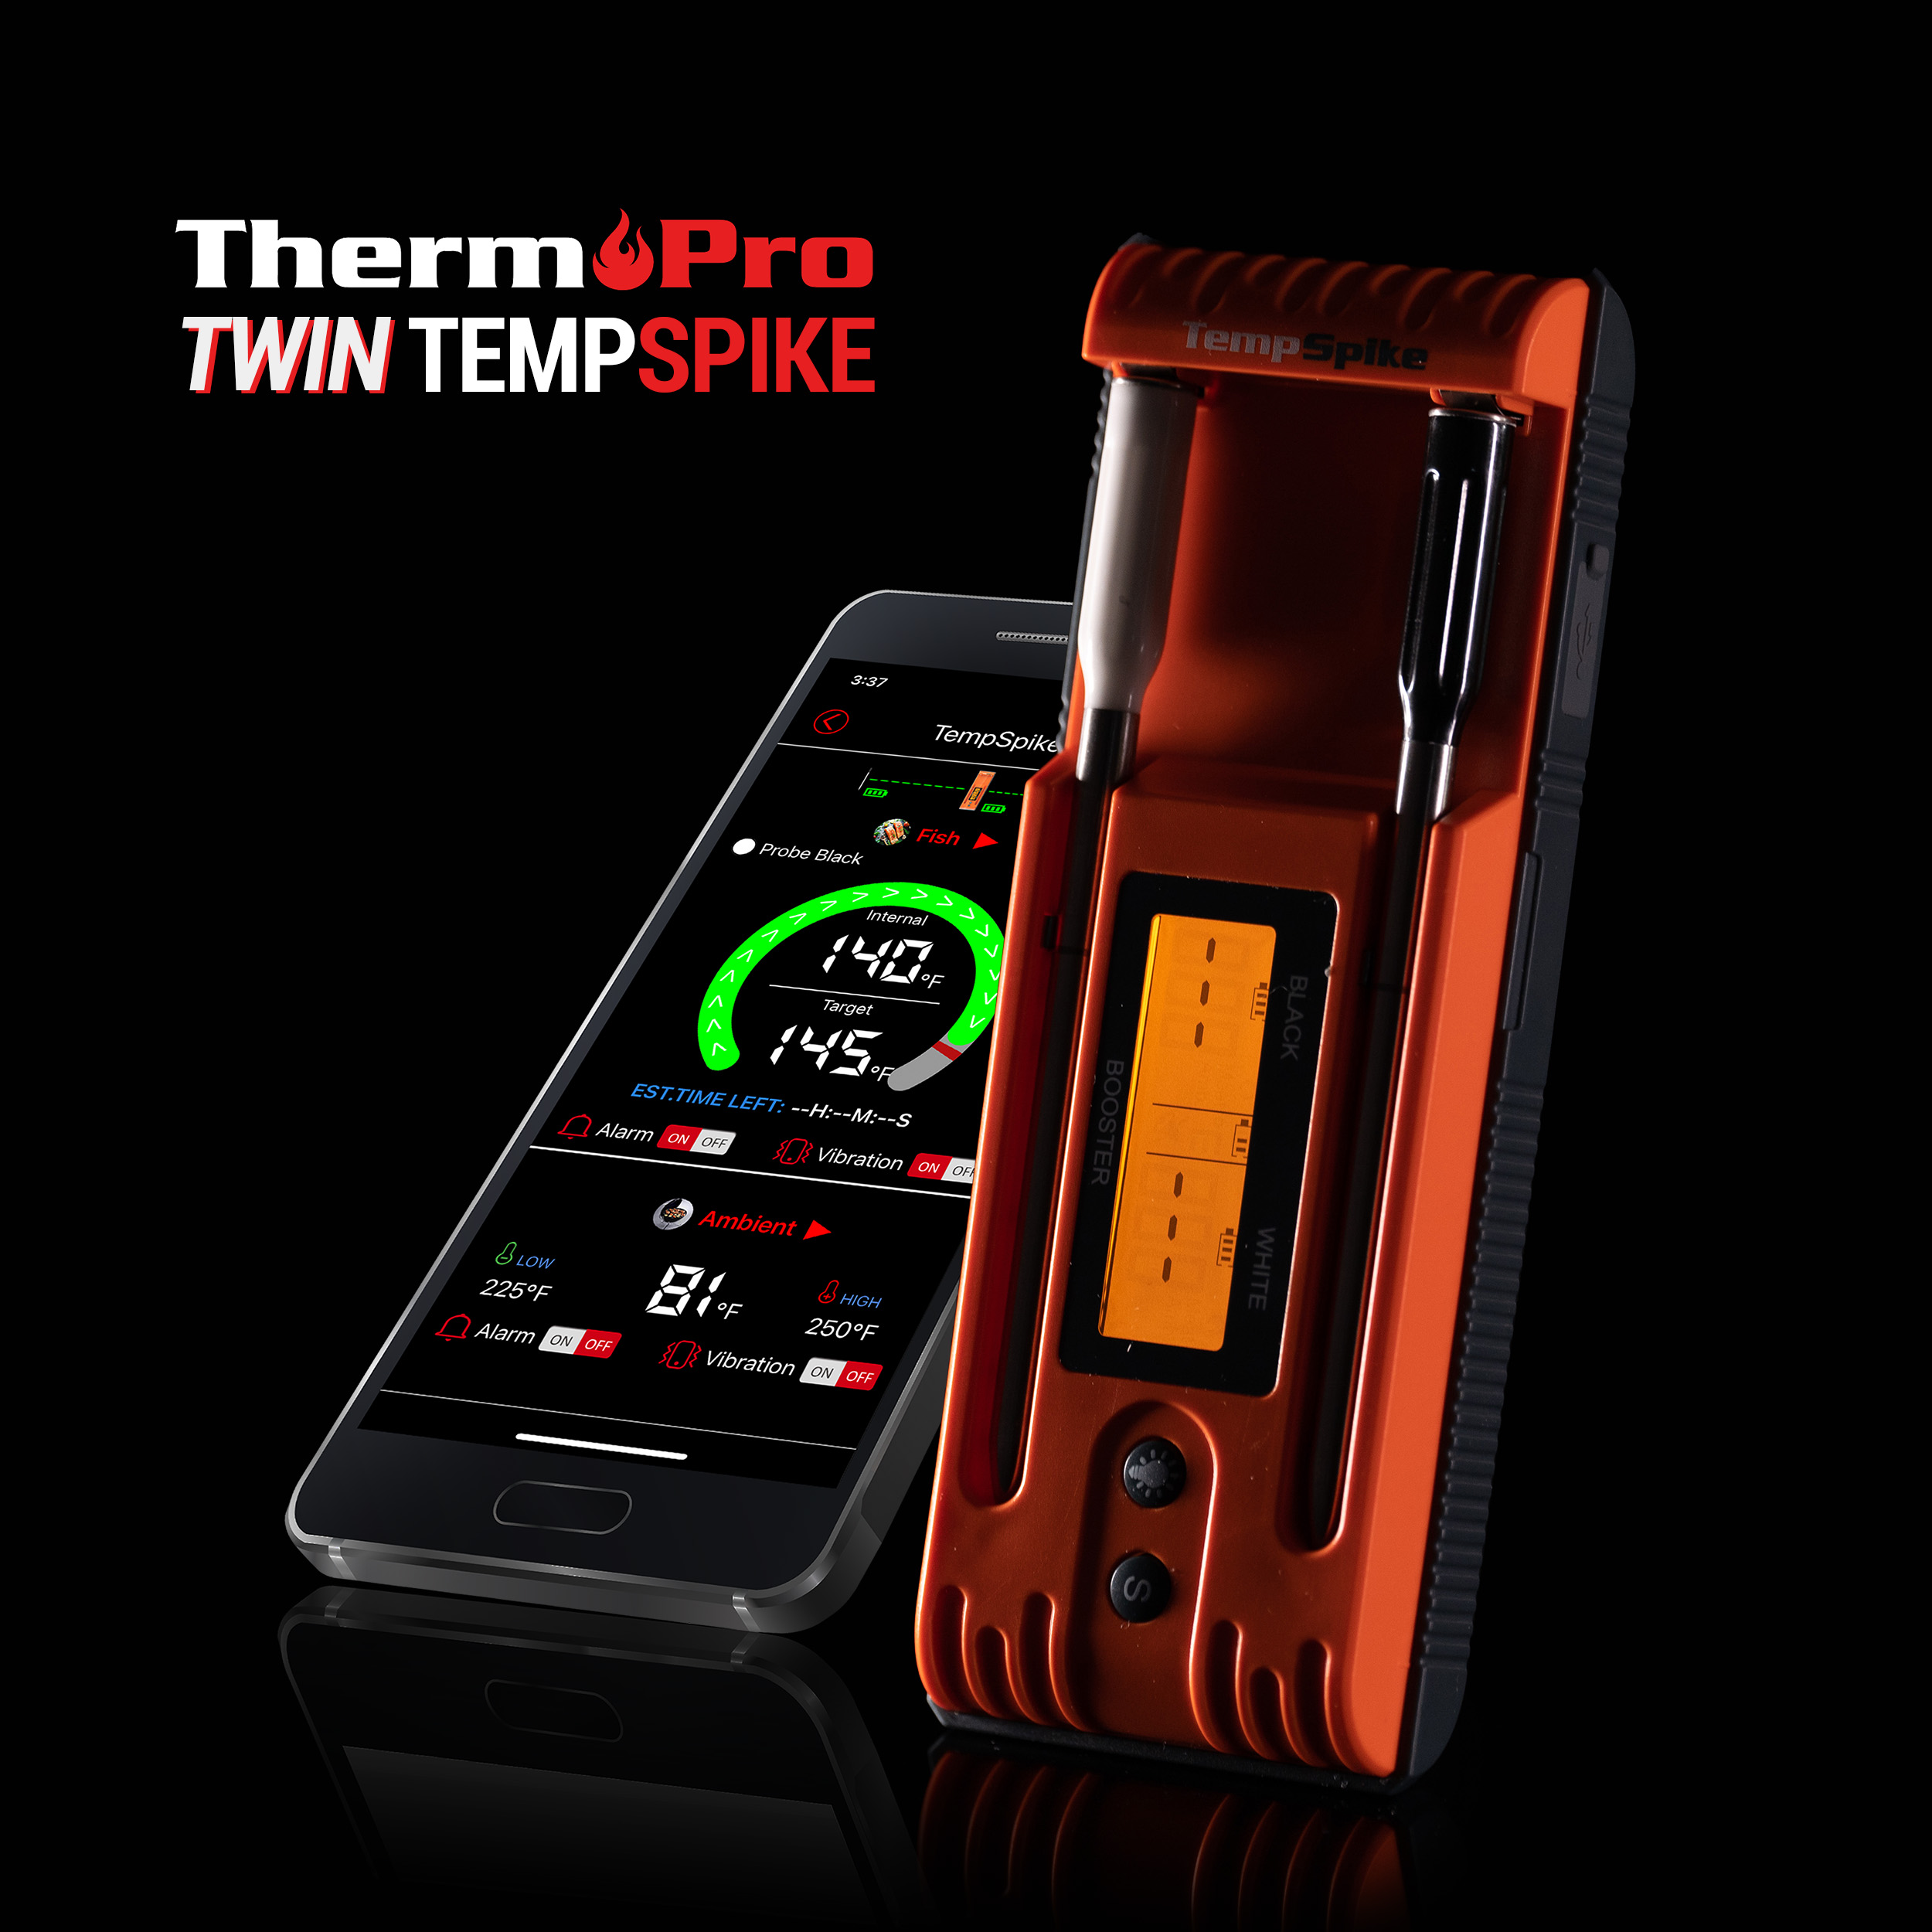 Twin TempSpike Offer - Up To 60% Off